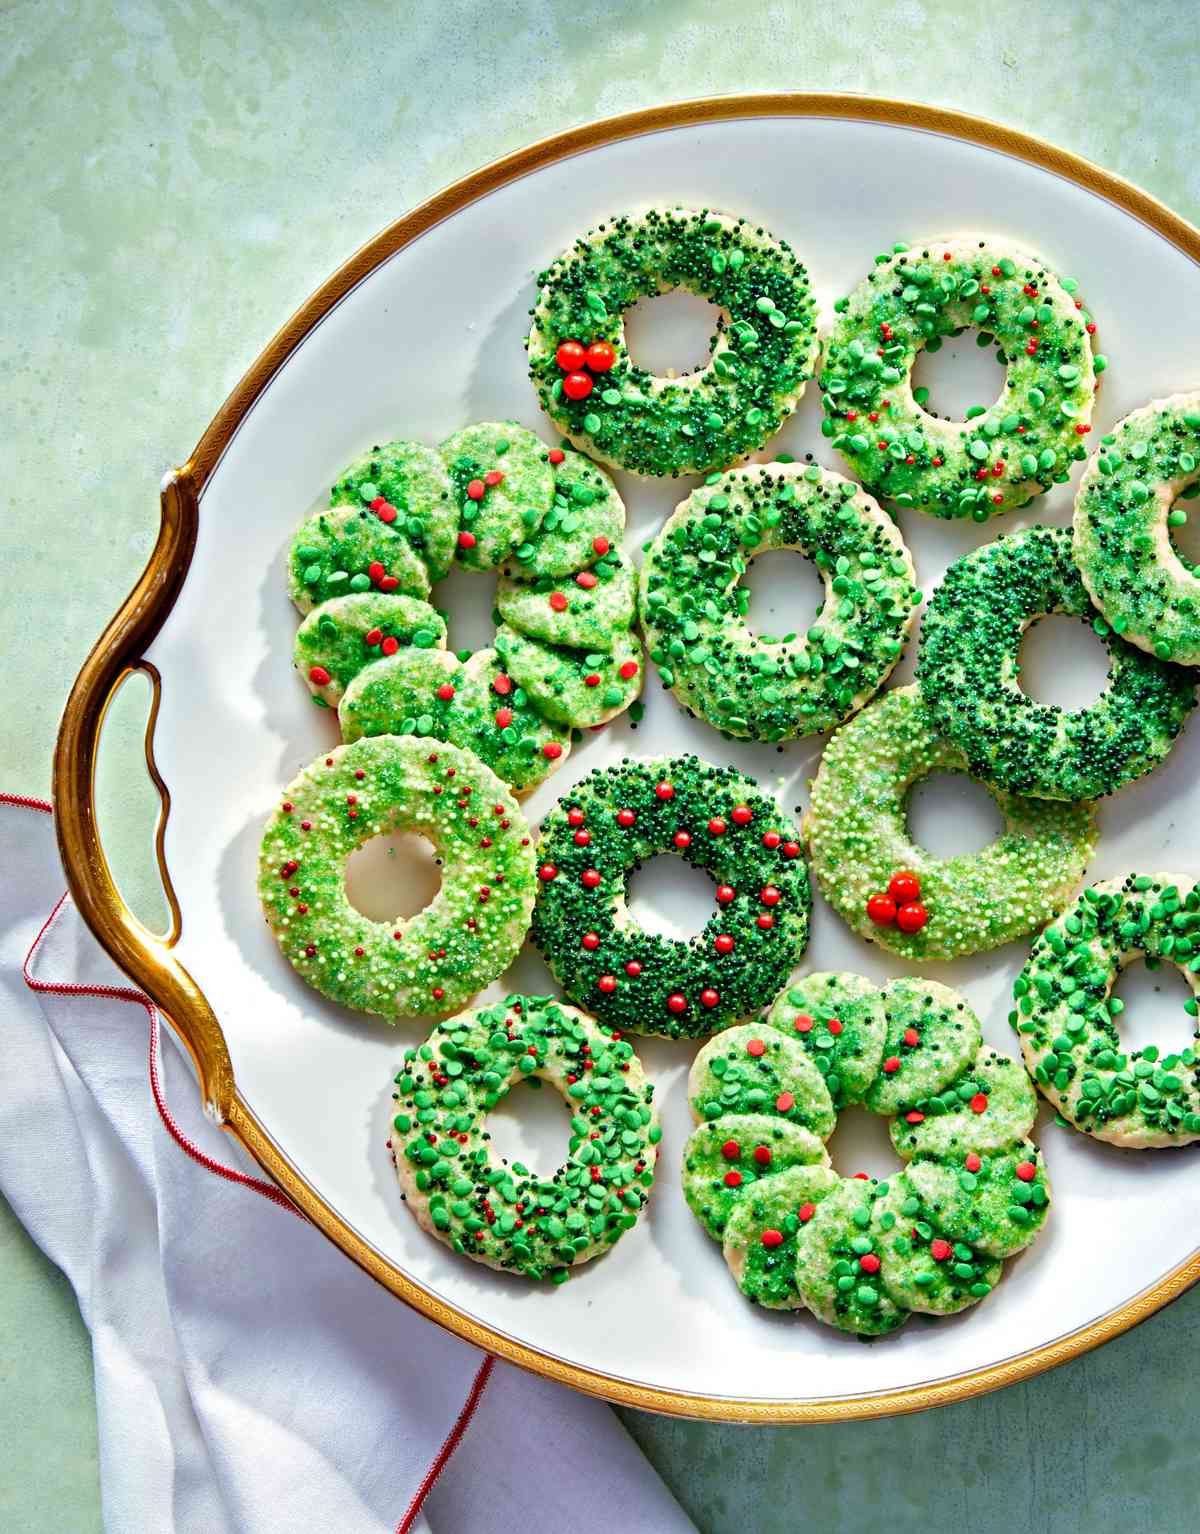 Our Most Nostalgic Holiday Cookie Recipes To Make For a Taste of Christmas in July